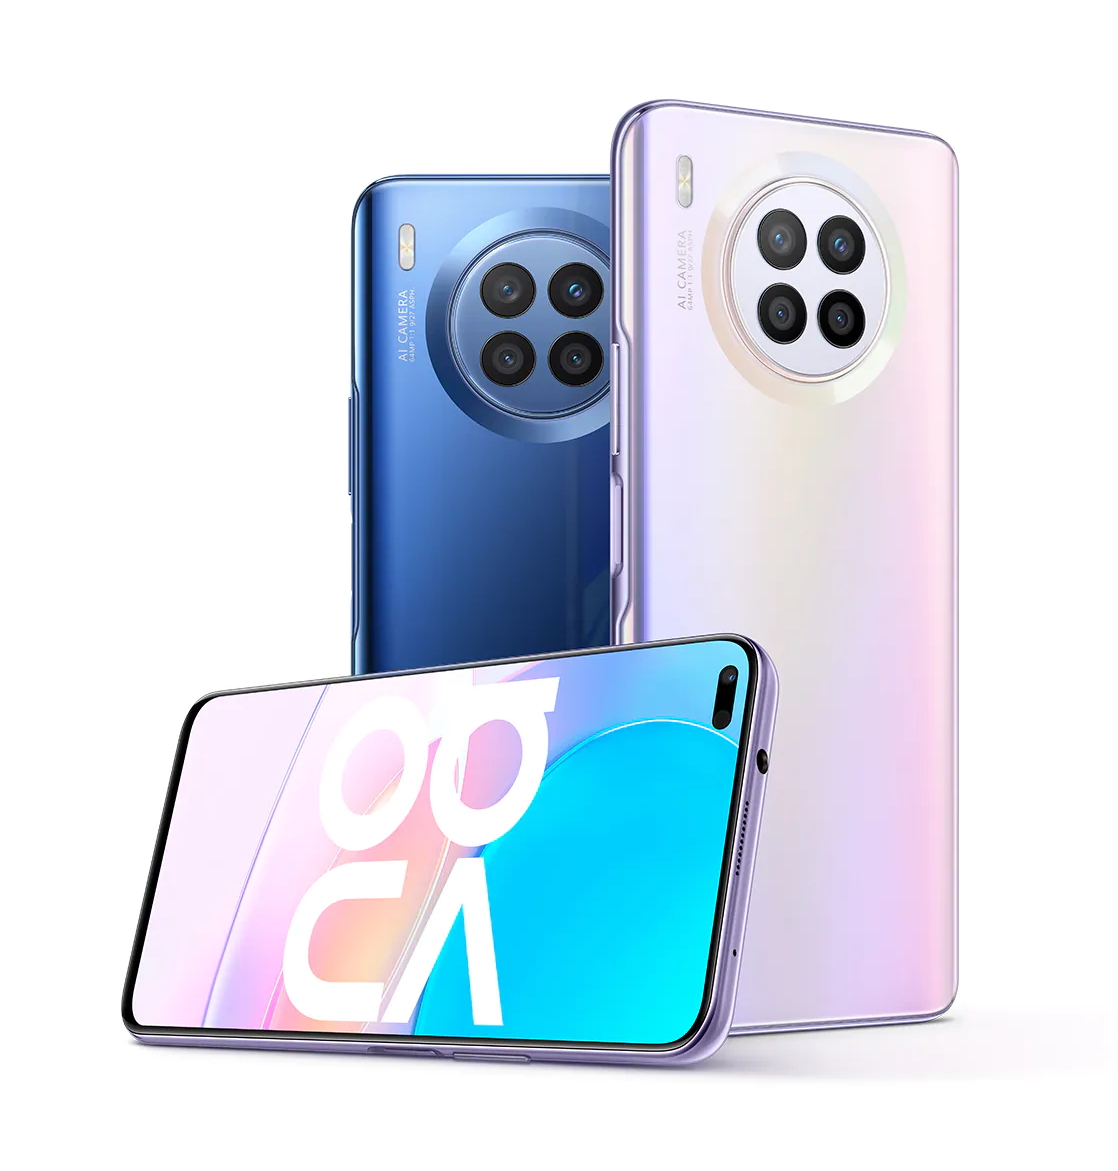 planter spellen Maak plaats Huawei nova 8i launched with Mate 30 series looks and a Snapdragon 662 SoC  - NotebookCheck.net News